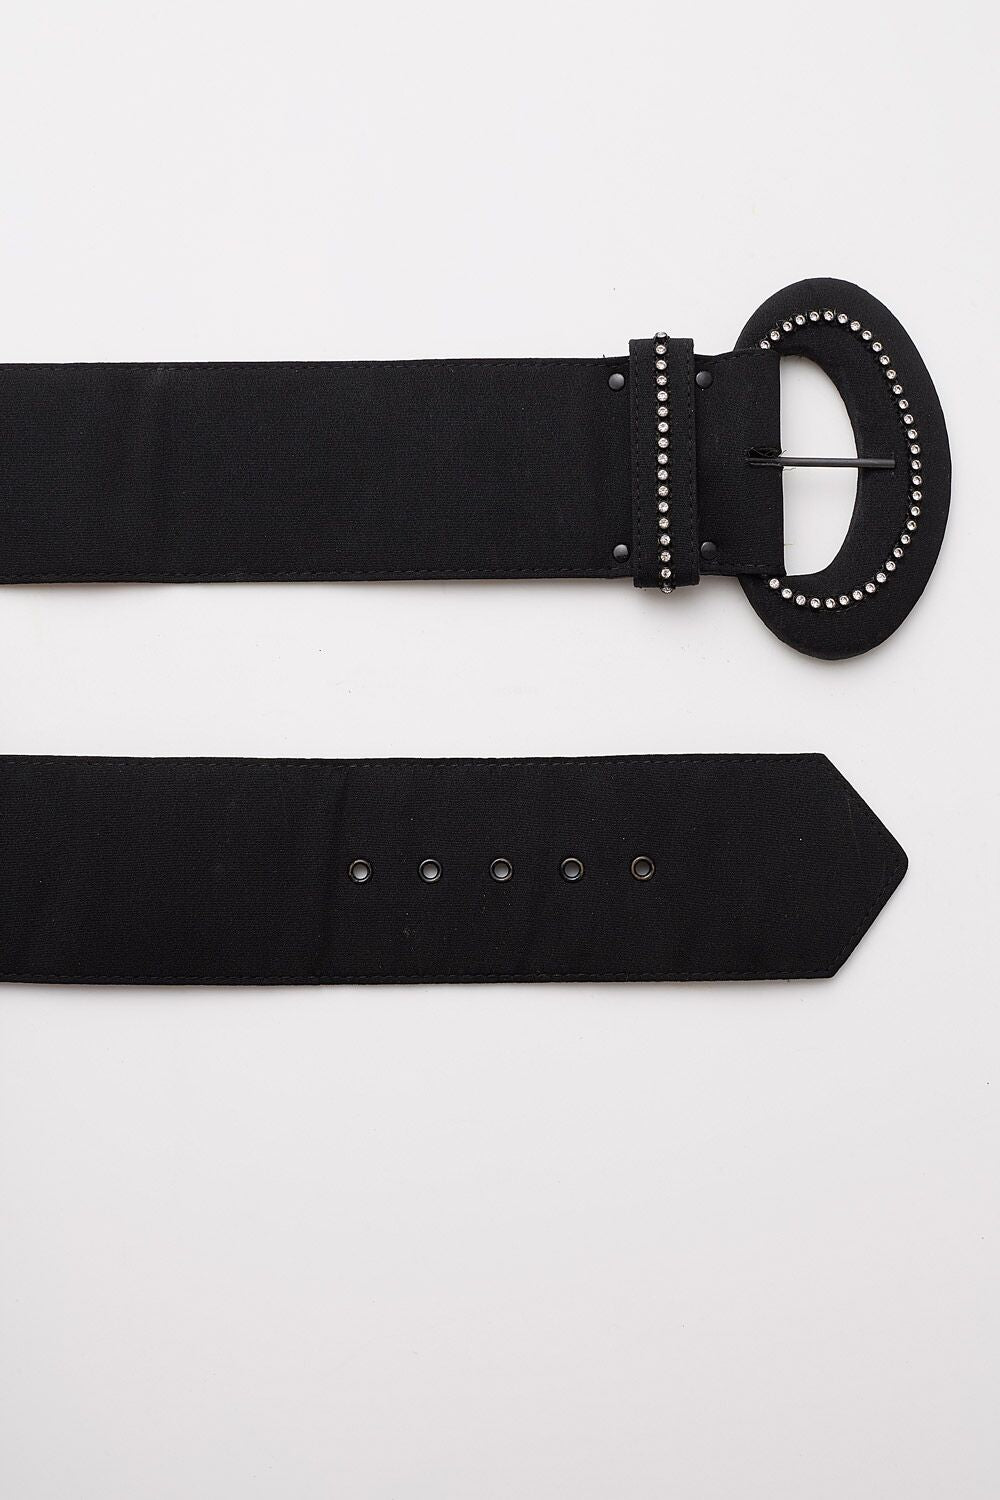 Vintage <br> 1980's extra wide black belt with diamante studded buckle